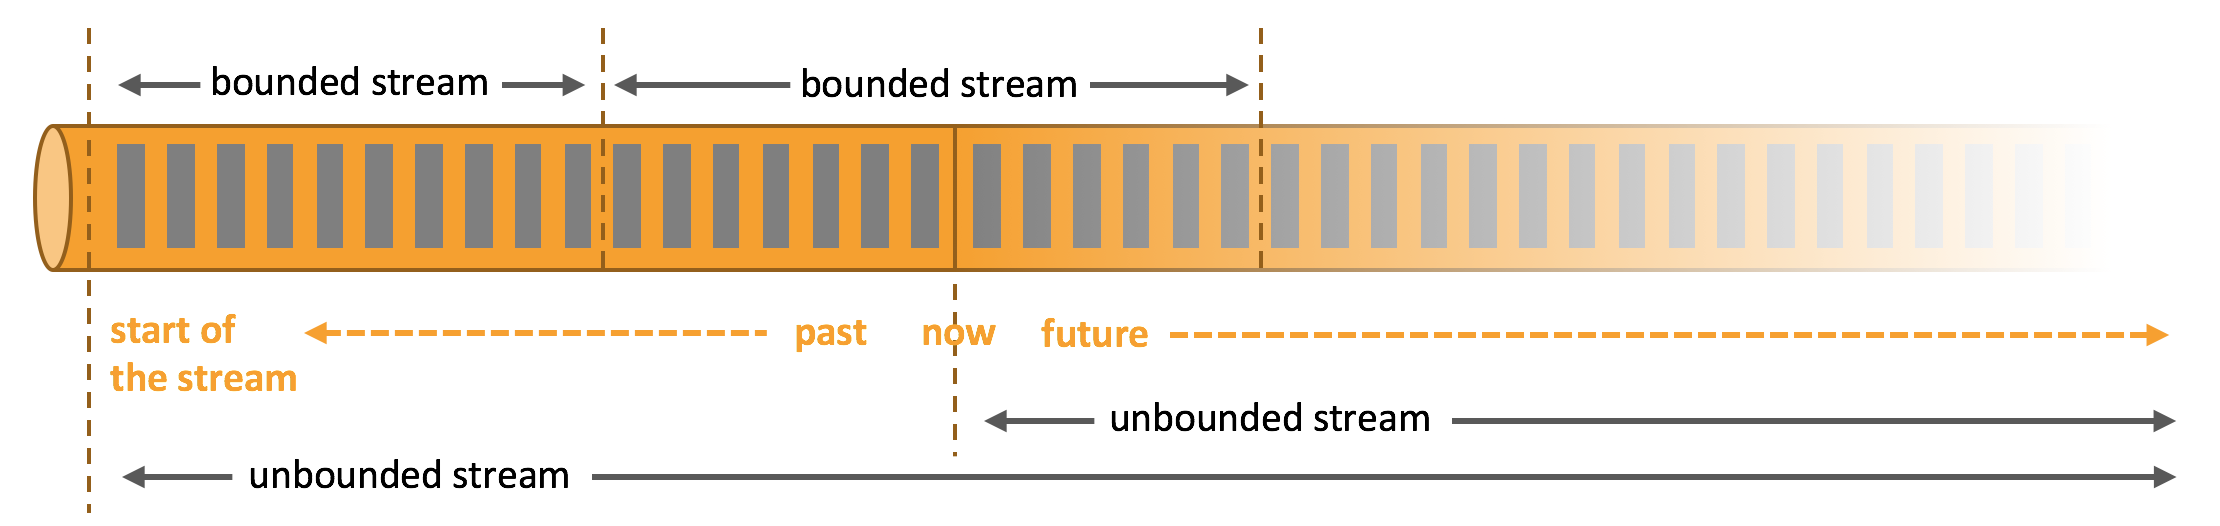 Bounded and Unbonded Streams